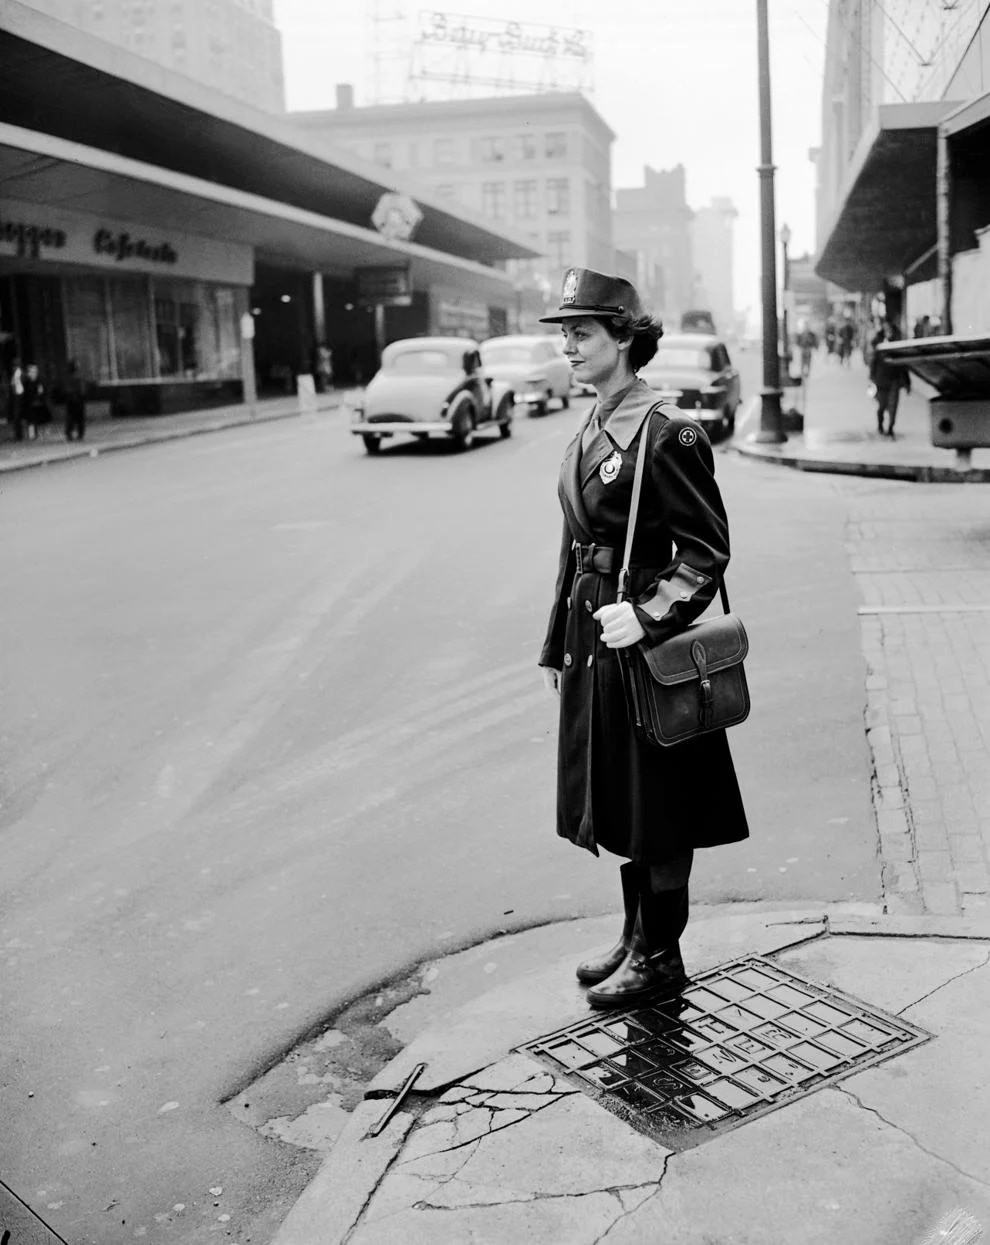 Mrs. M.S. Jackson, one of Richmond's first full-fledged female traffic officials with full police authority, worked at Seventh and Grace streets downtown, 1952.